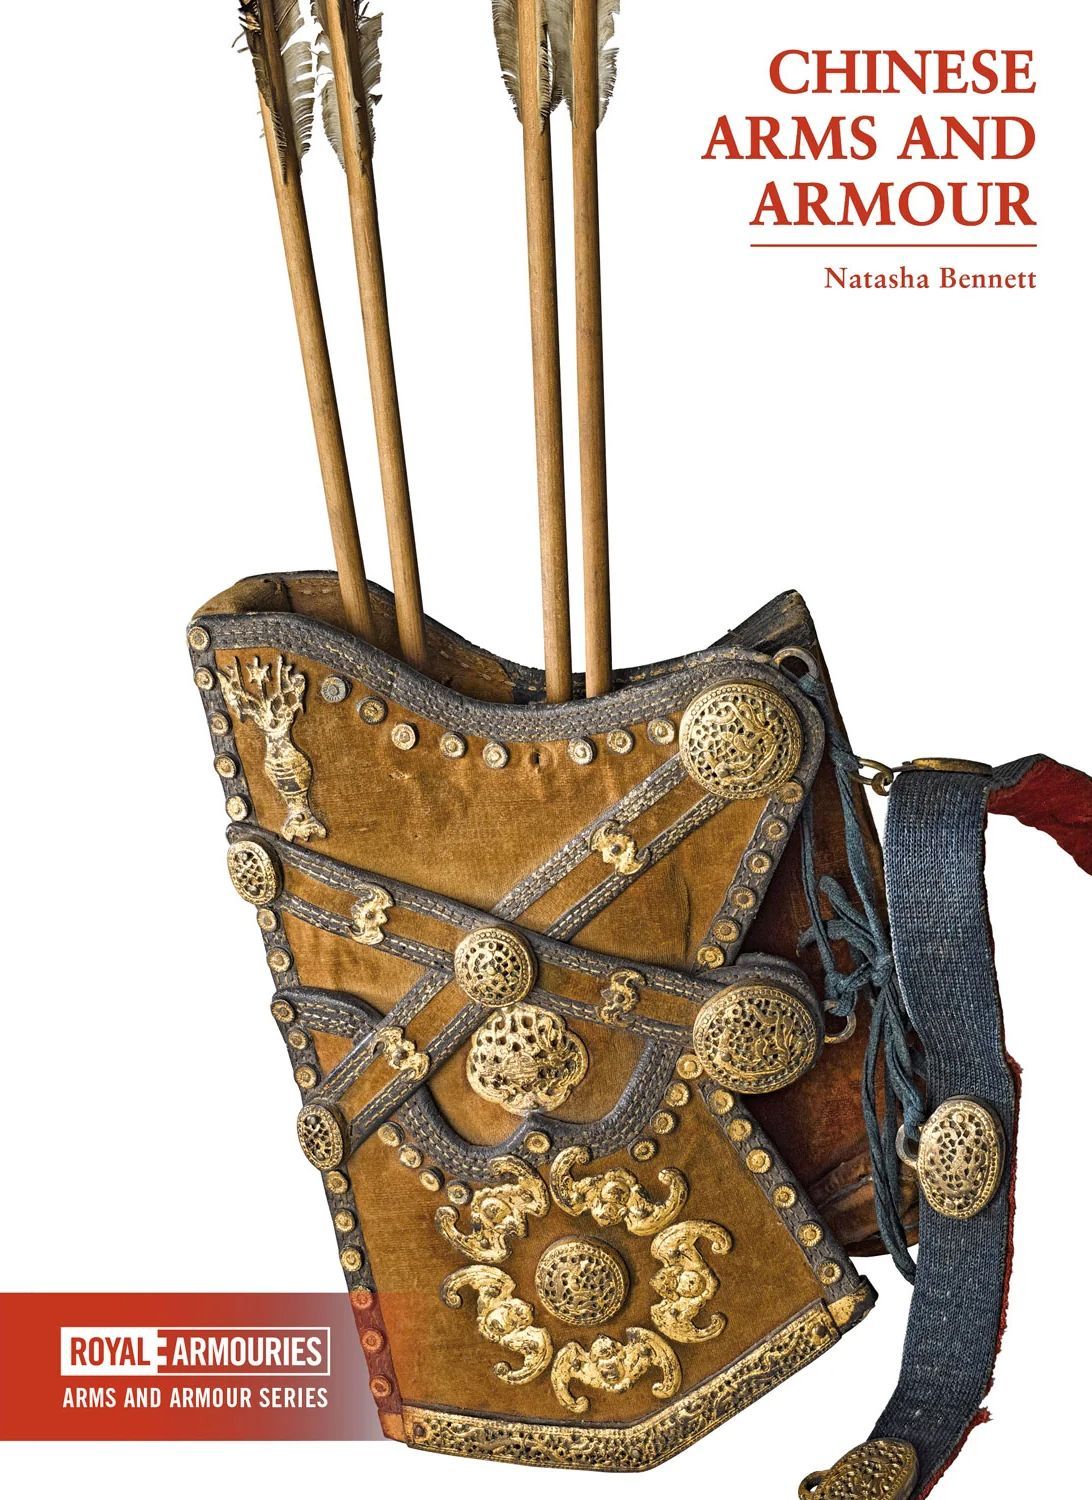 cover of a book showing arrows in a quiver